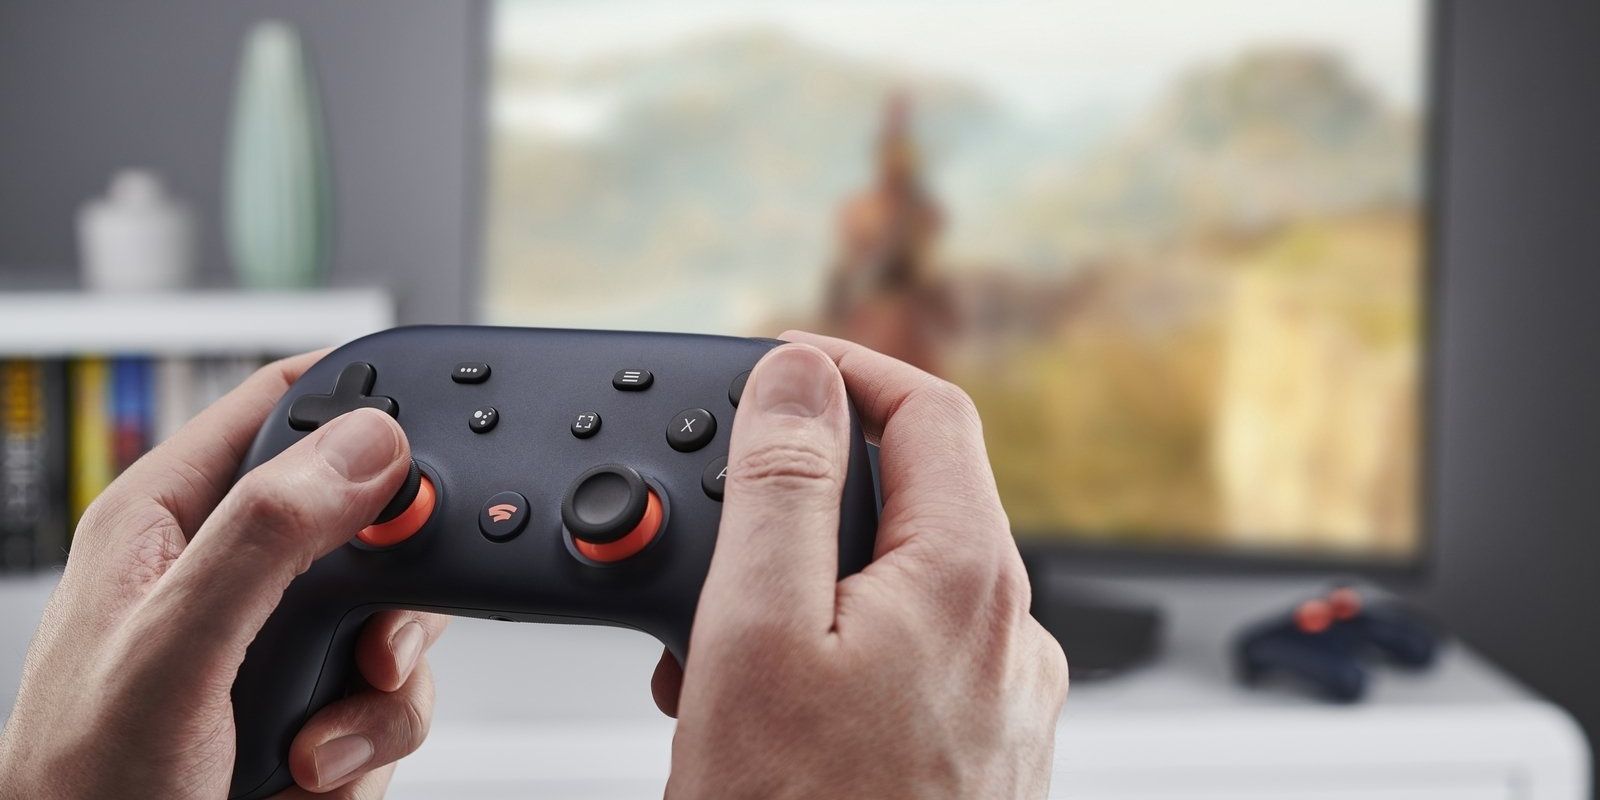 Google Stadia Now Available On LG WebOS TVs, Here Are The Details